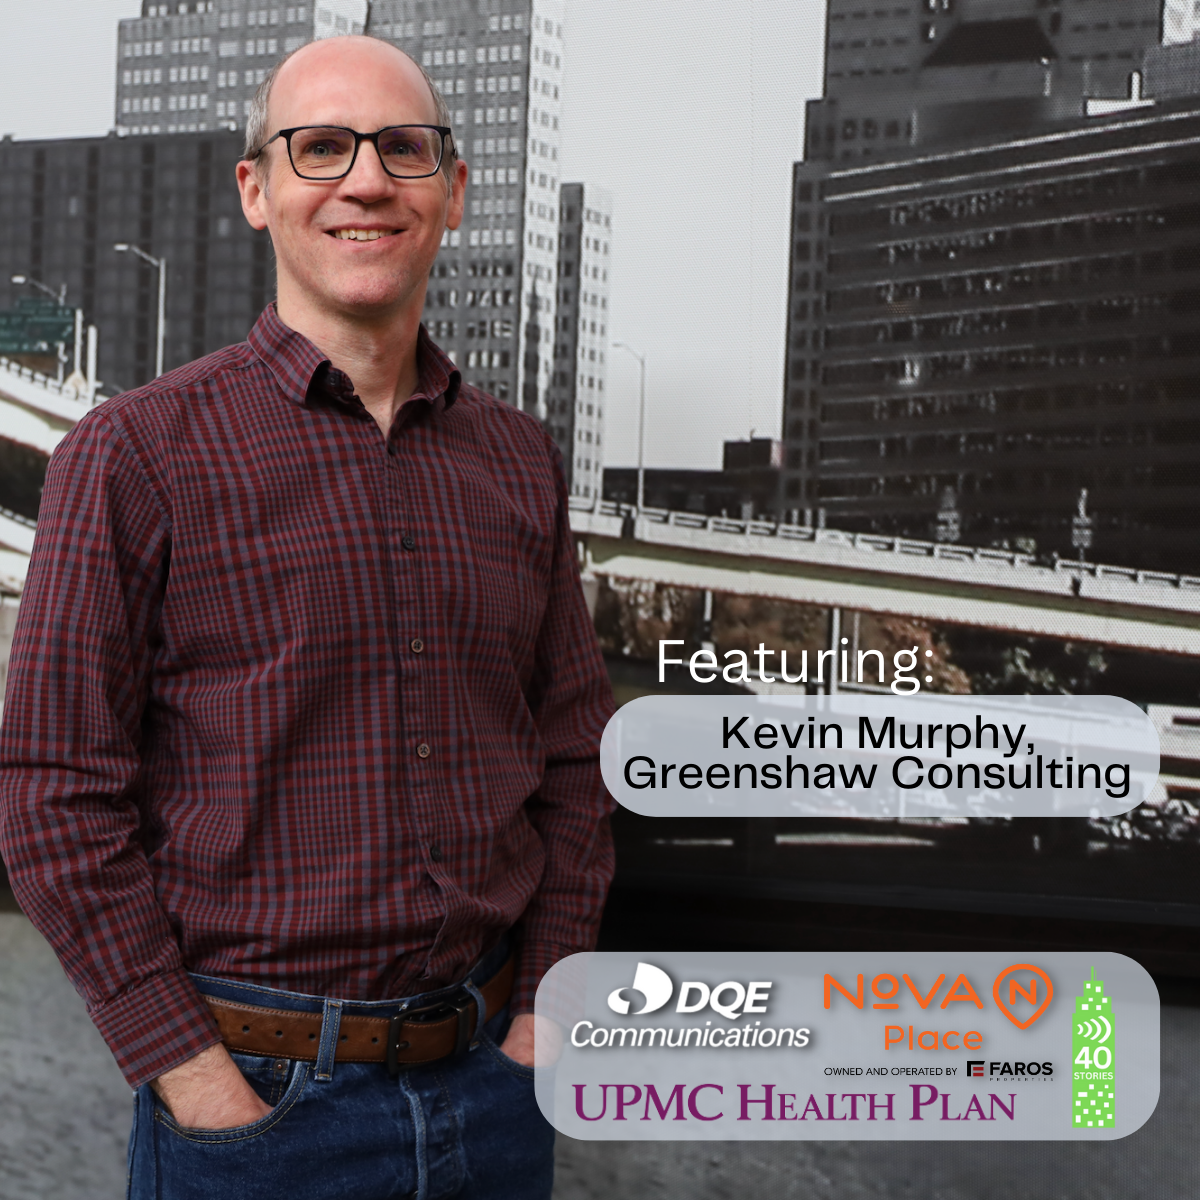 Kevin Murphy. Greenshaw Consulting